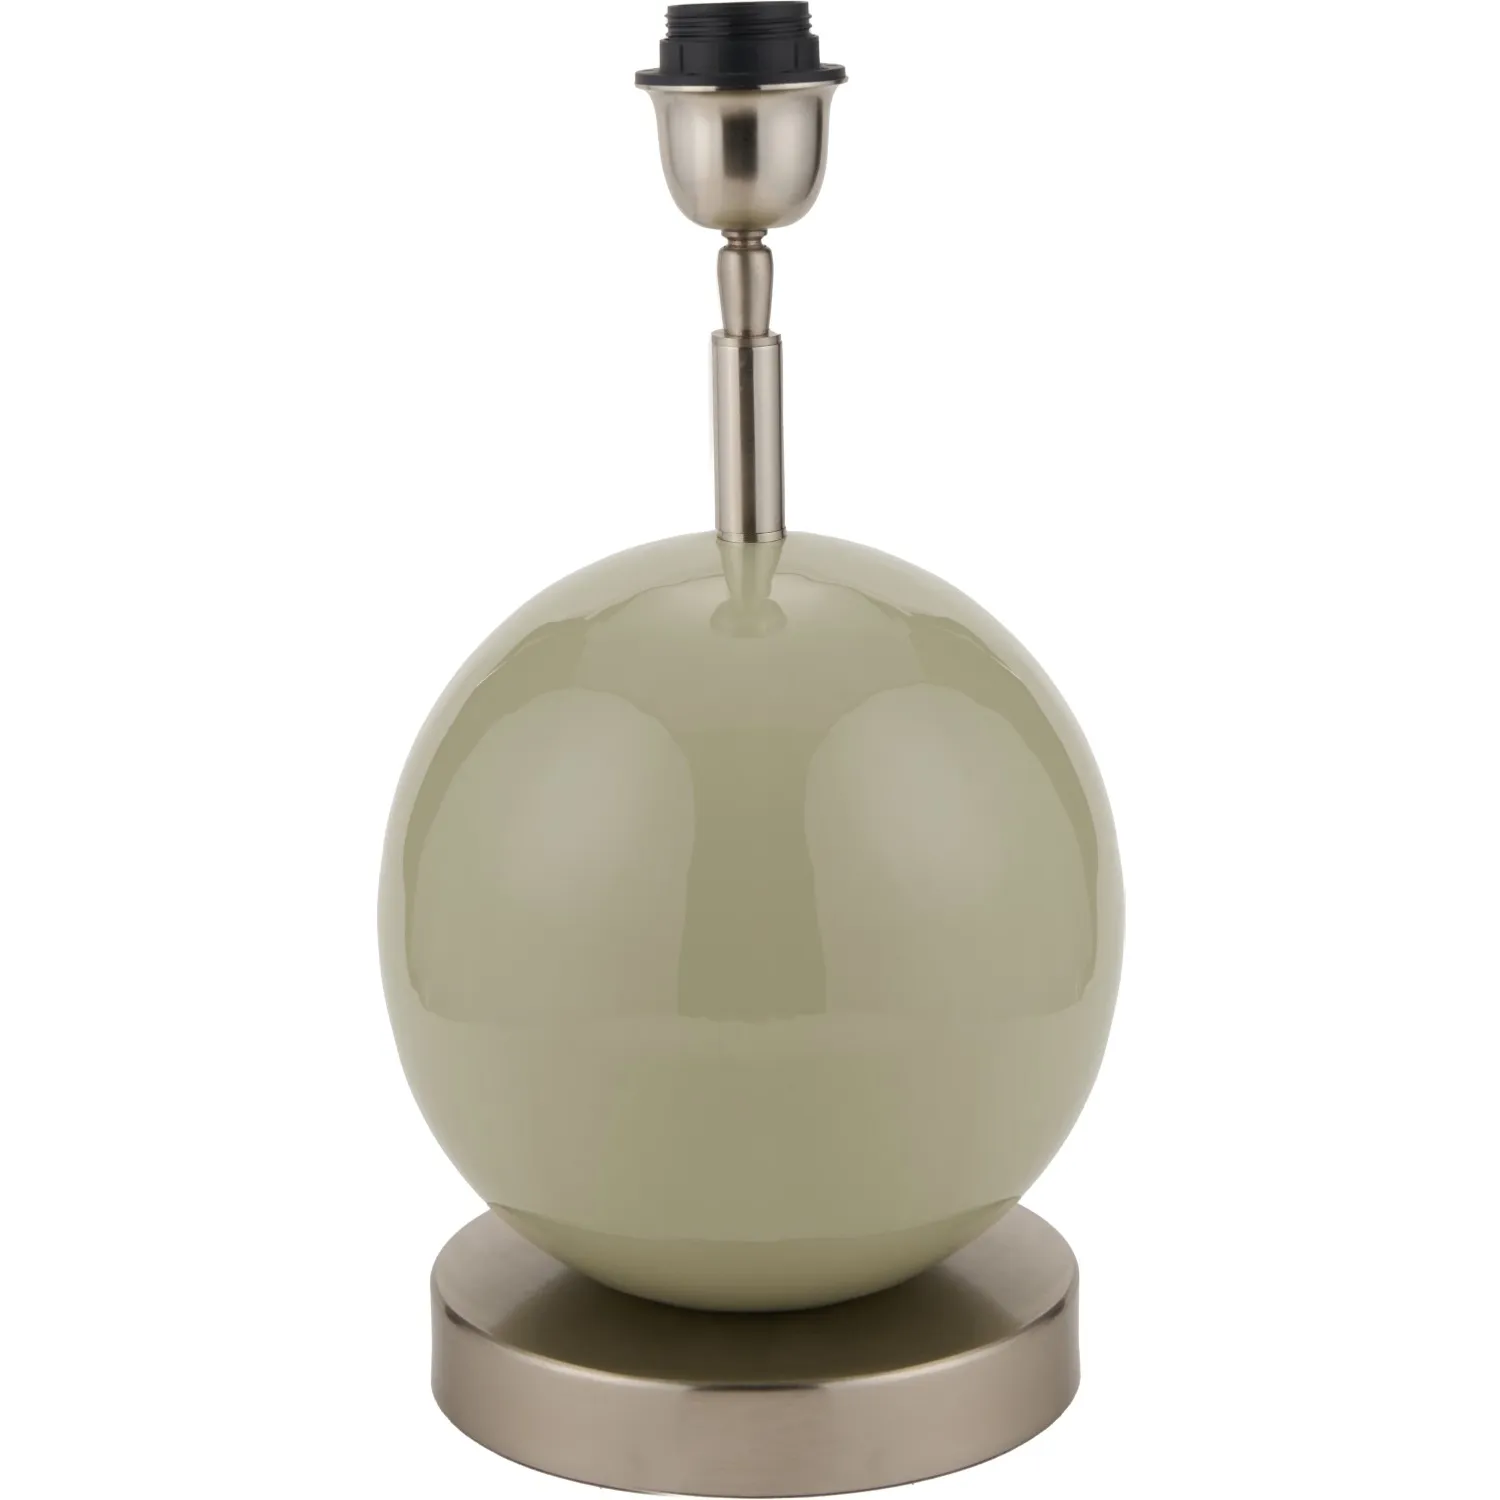 Sofia Sage and Silver Enamel Table Lamp